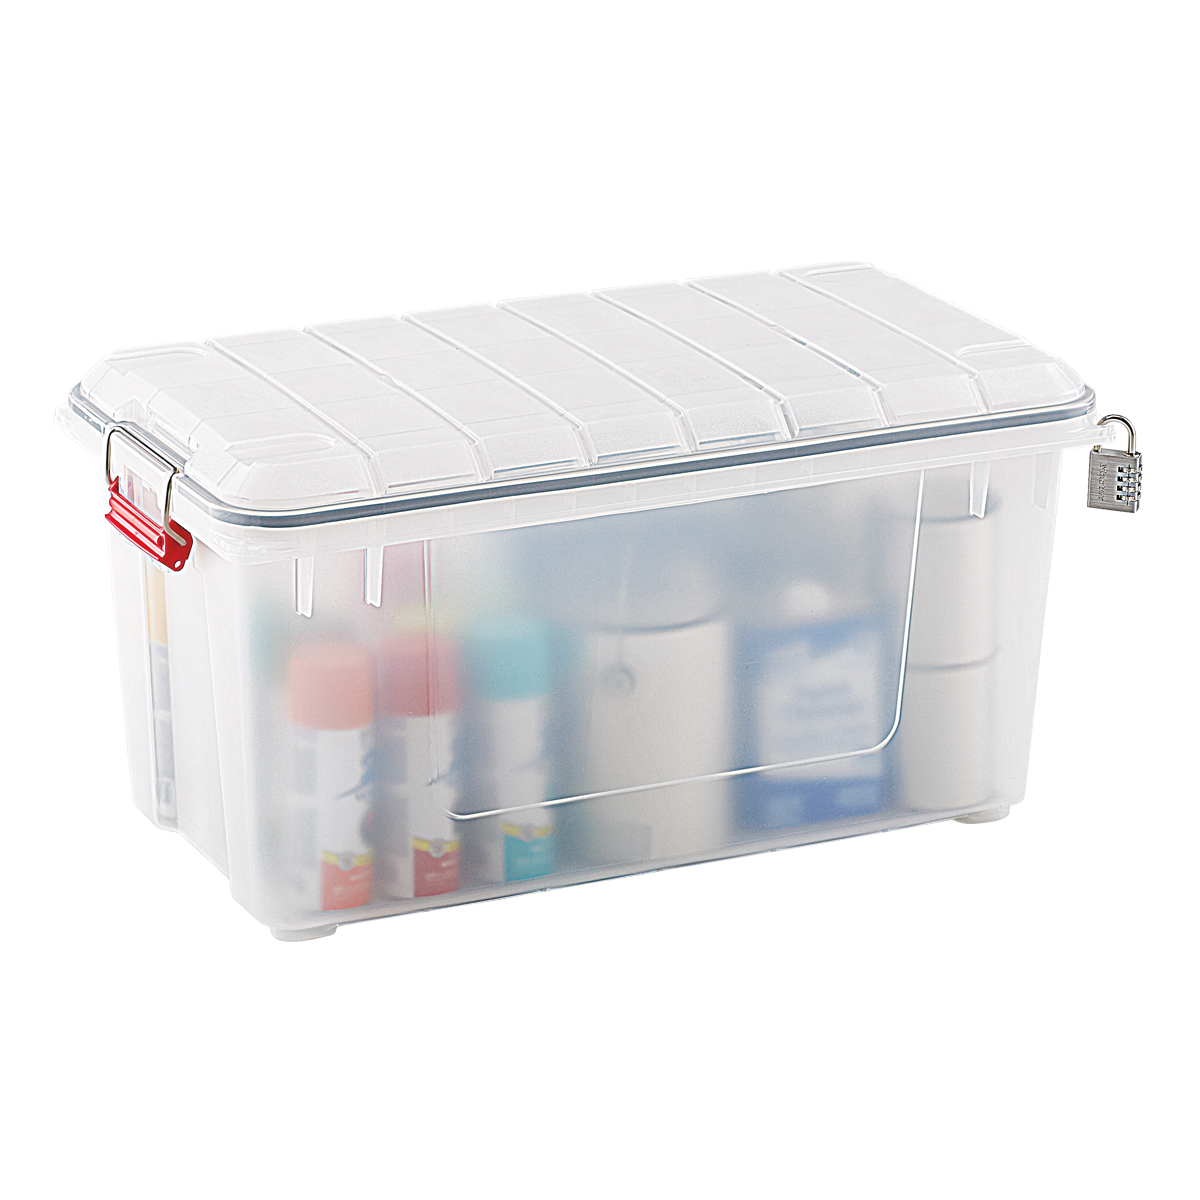 Storage Totes Large Plastic Bins Storage Containers The inside dimensions 1200 X 1200